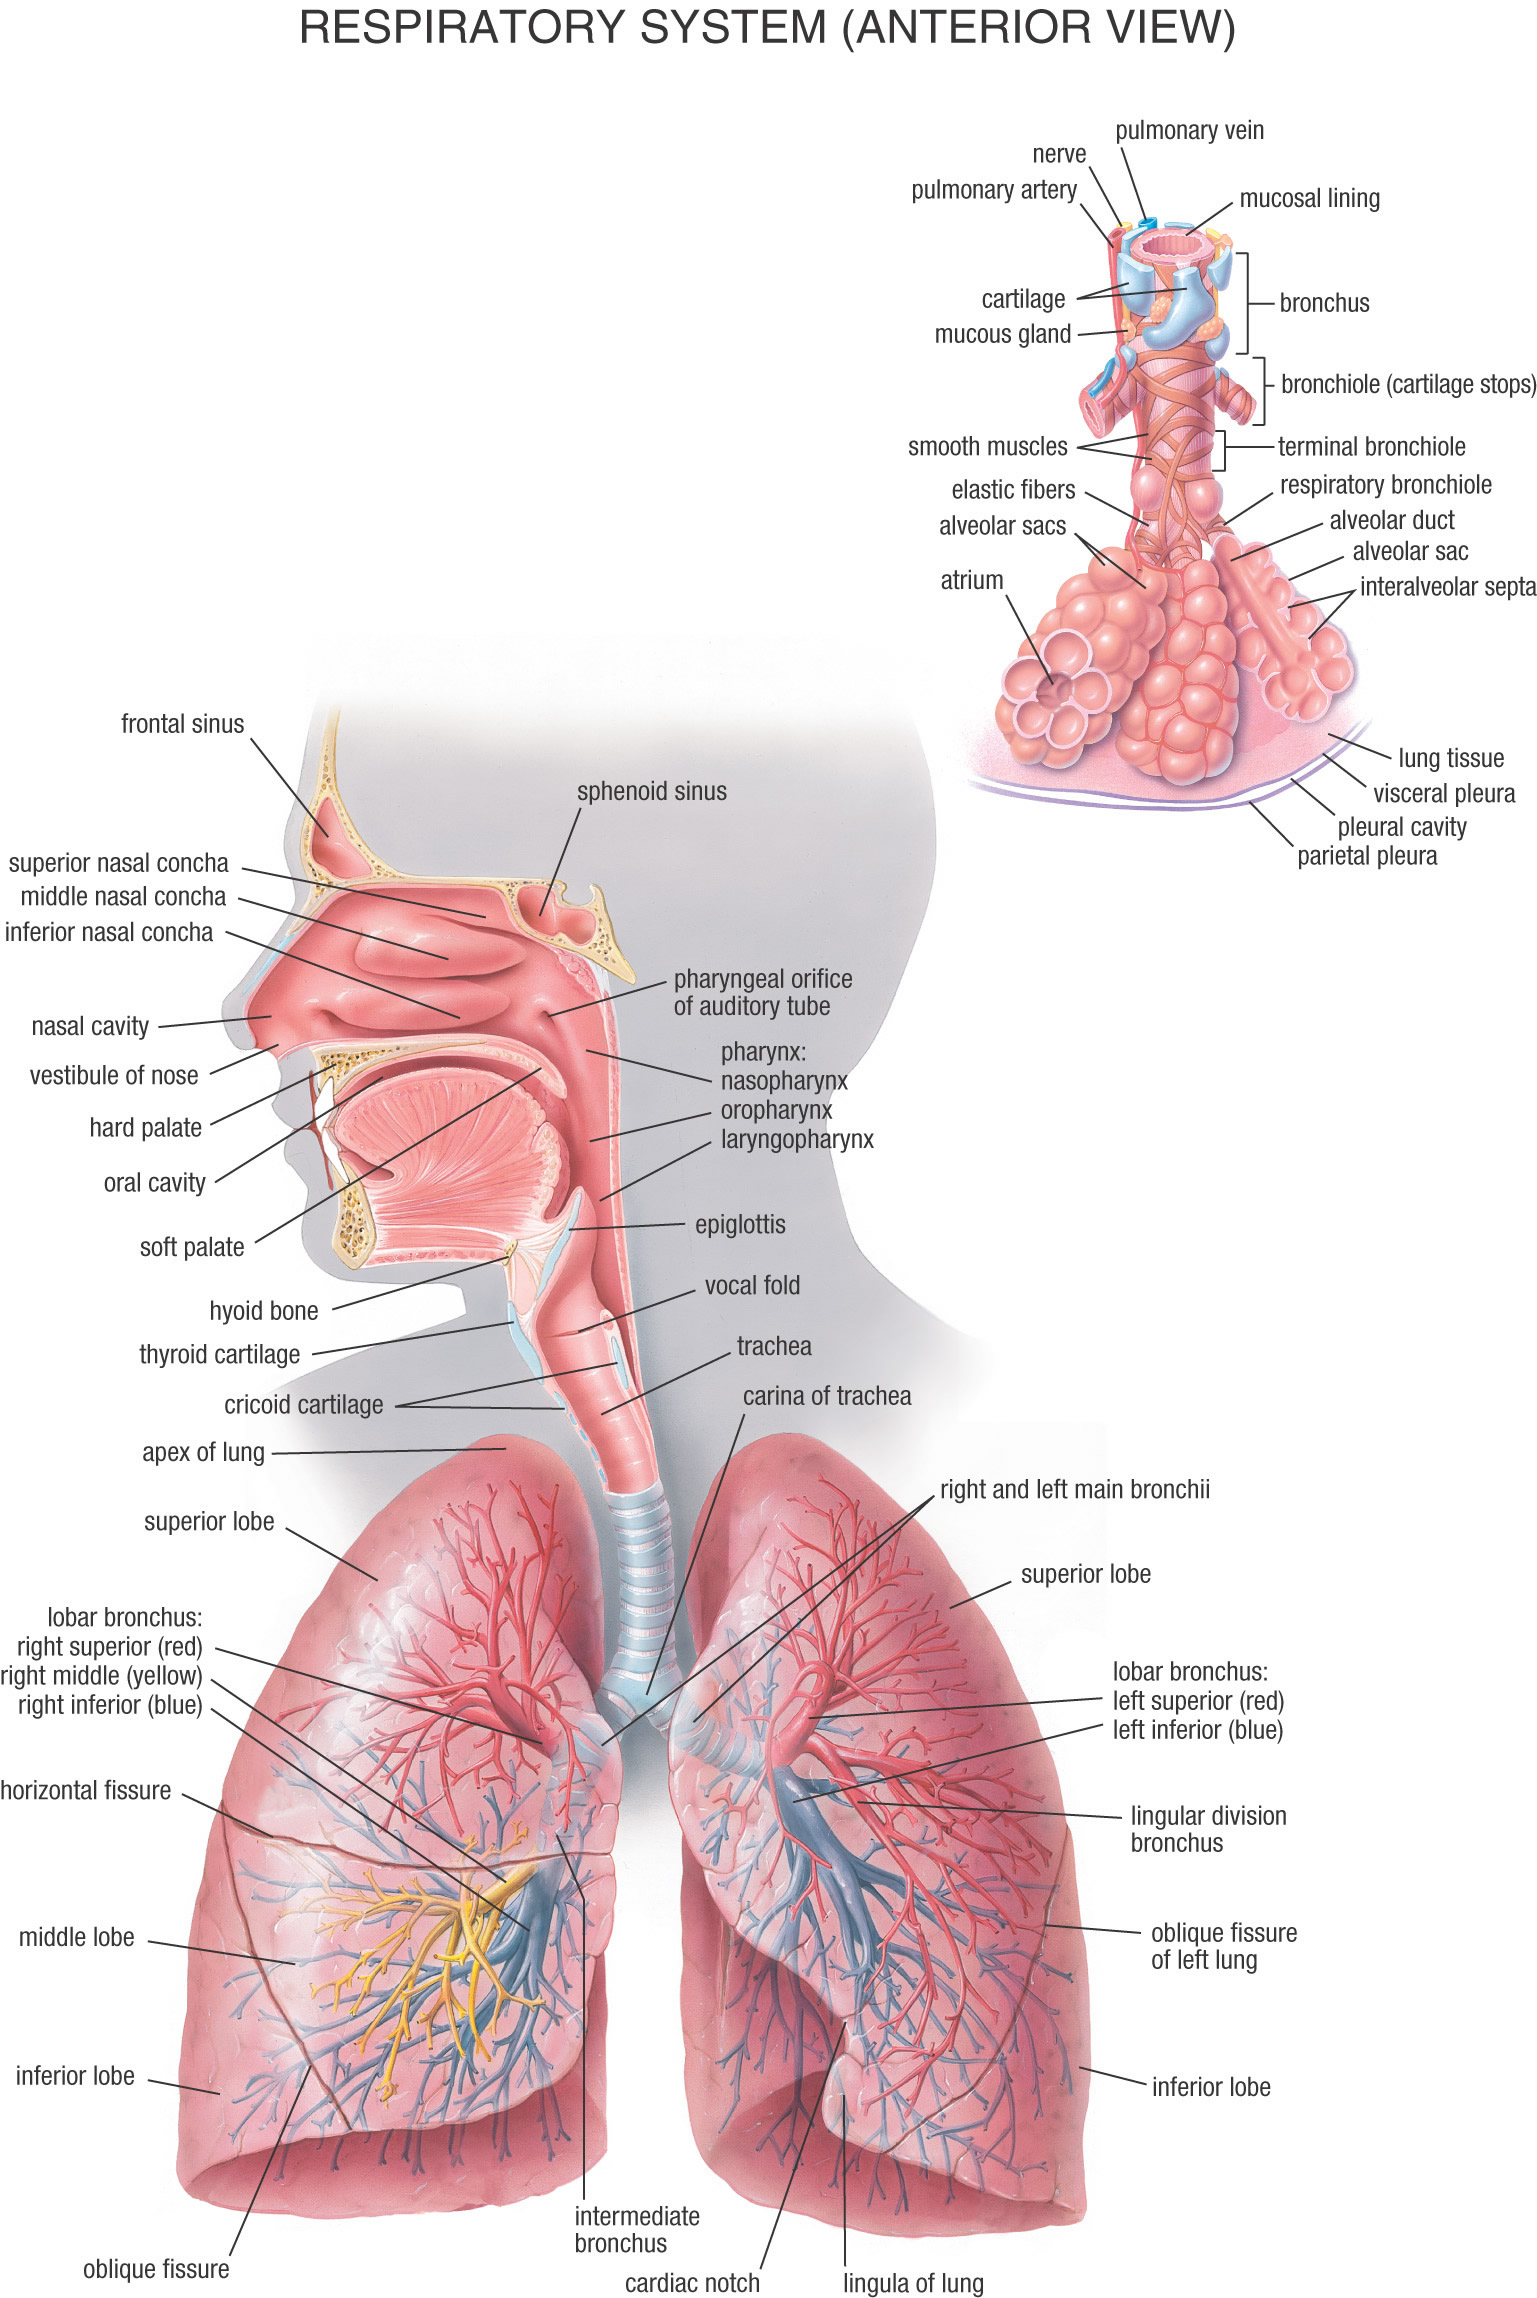 The Respiratory System Diagram A Labeled Diagram Of The Respiratory System Beautiful 26 Beautiful